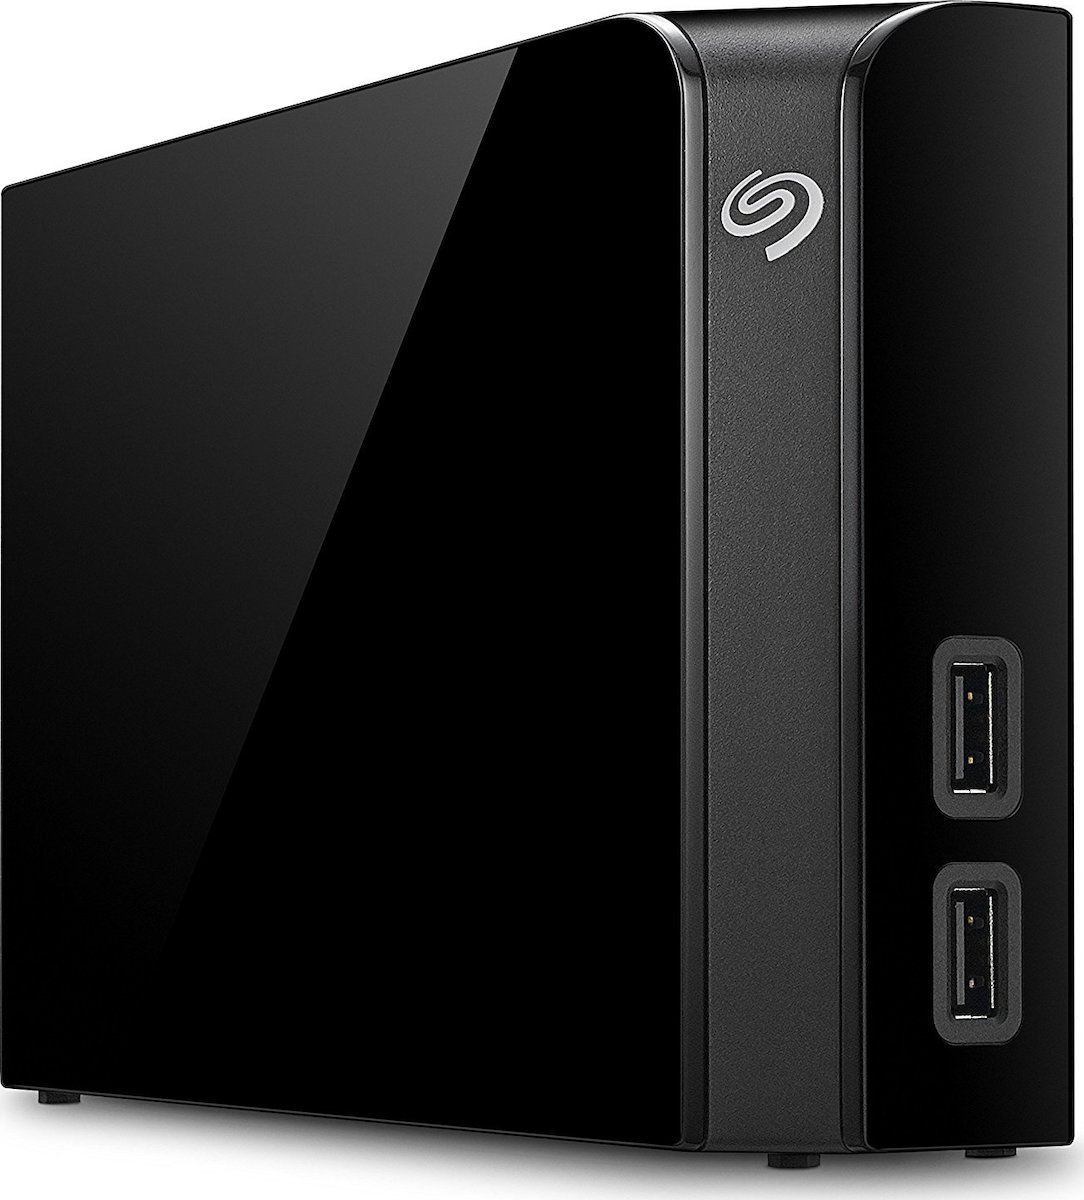 More information about "2x Seagate Backup Plus Hub Desktop USB 3.0 Εξωτερικός HDD 8TB 3.5""